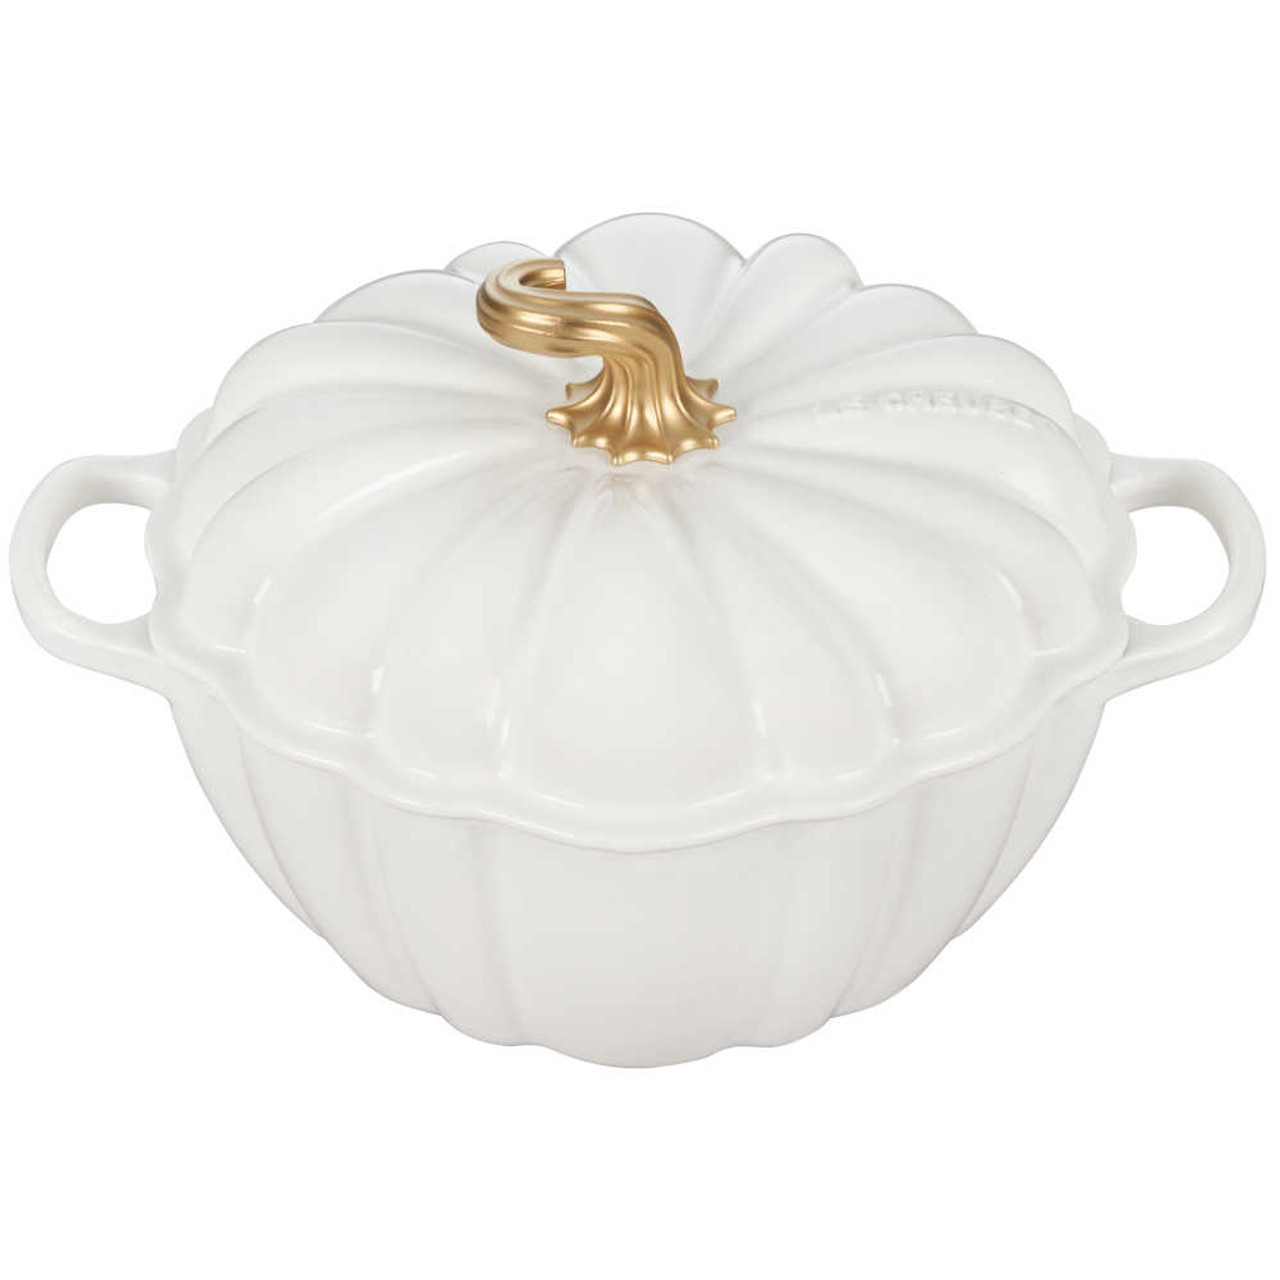 https://cdn11.bigcommerce.com/s-hccytny0od/images/stencil/1280x1280/products/5571/24349/Le_Creuset_Pumpkin_Cocotte_in_White__50046.1691170835.jpg?c=2?imbypass=on